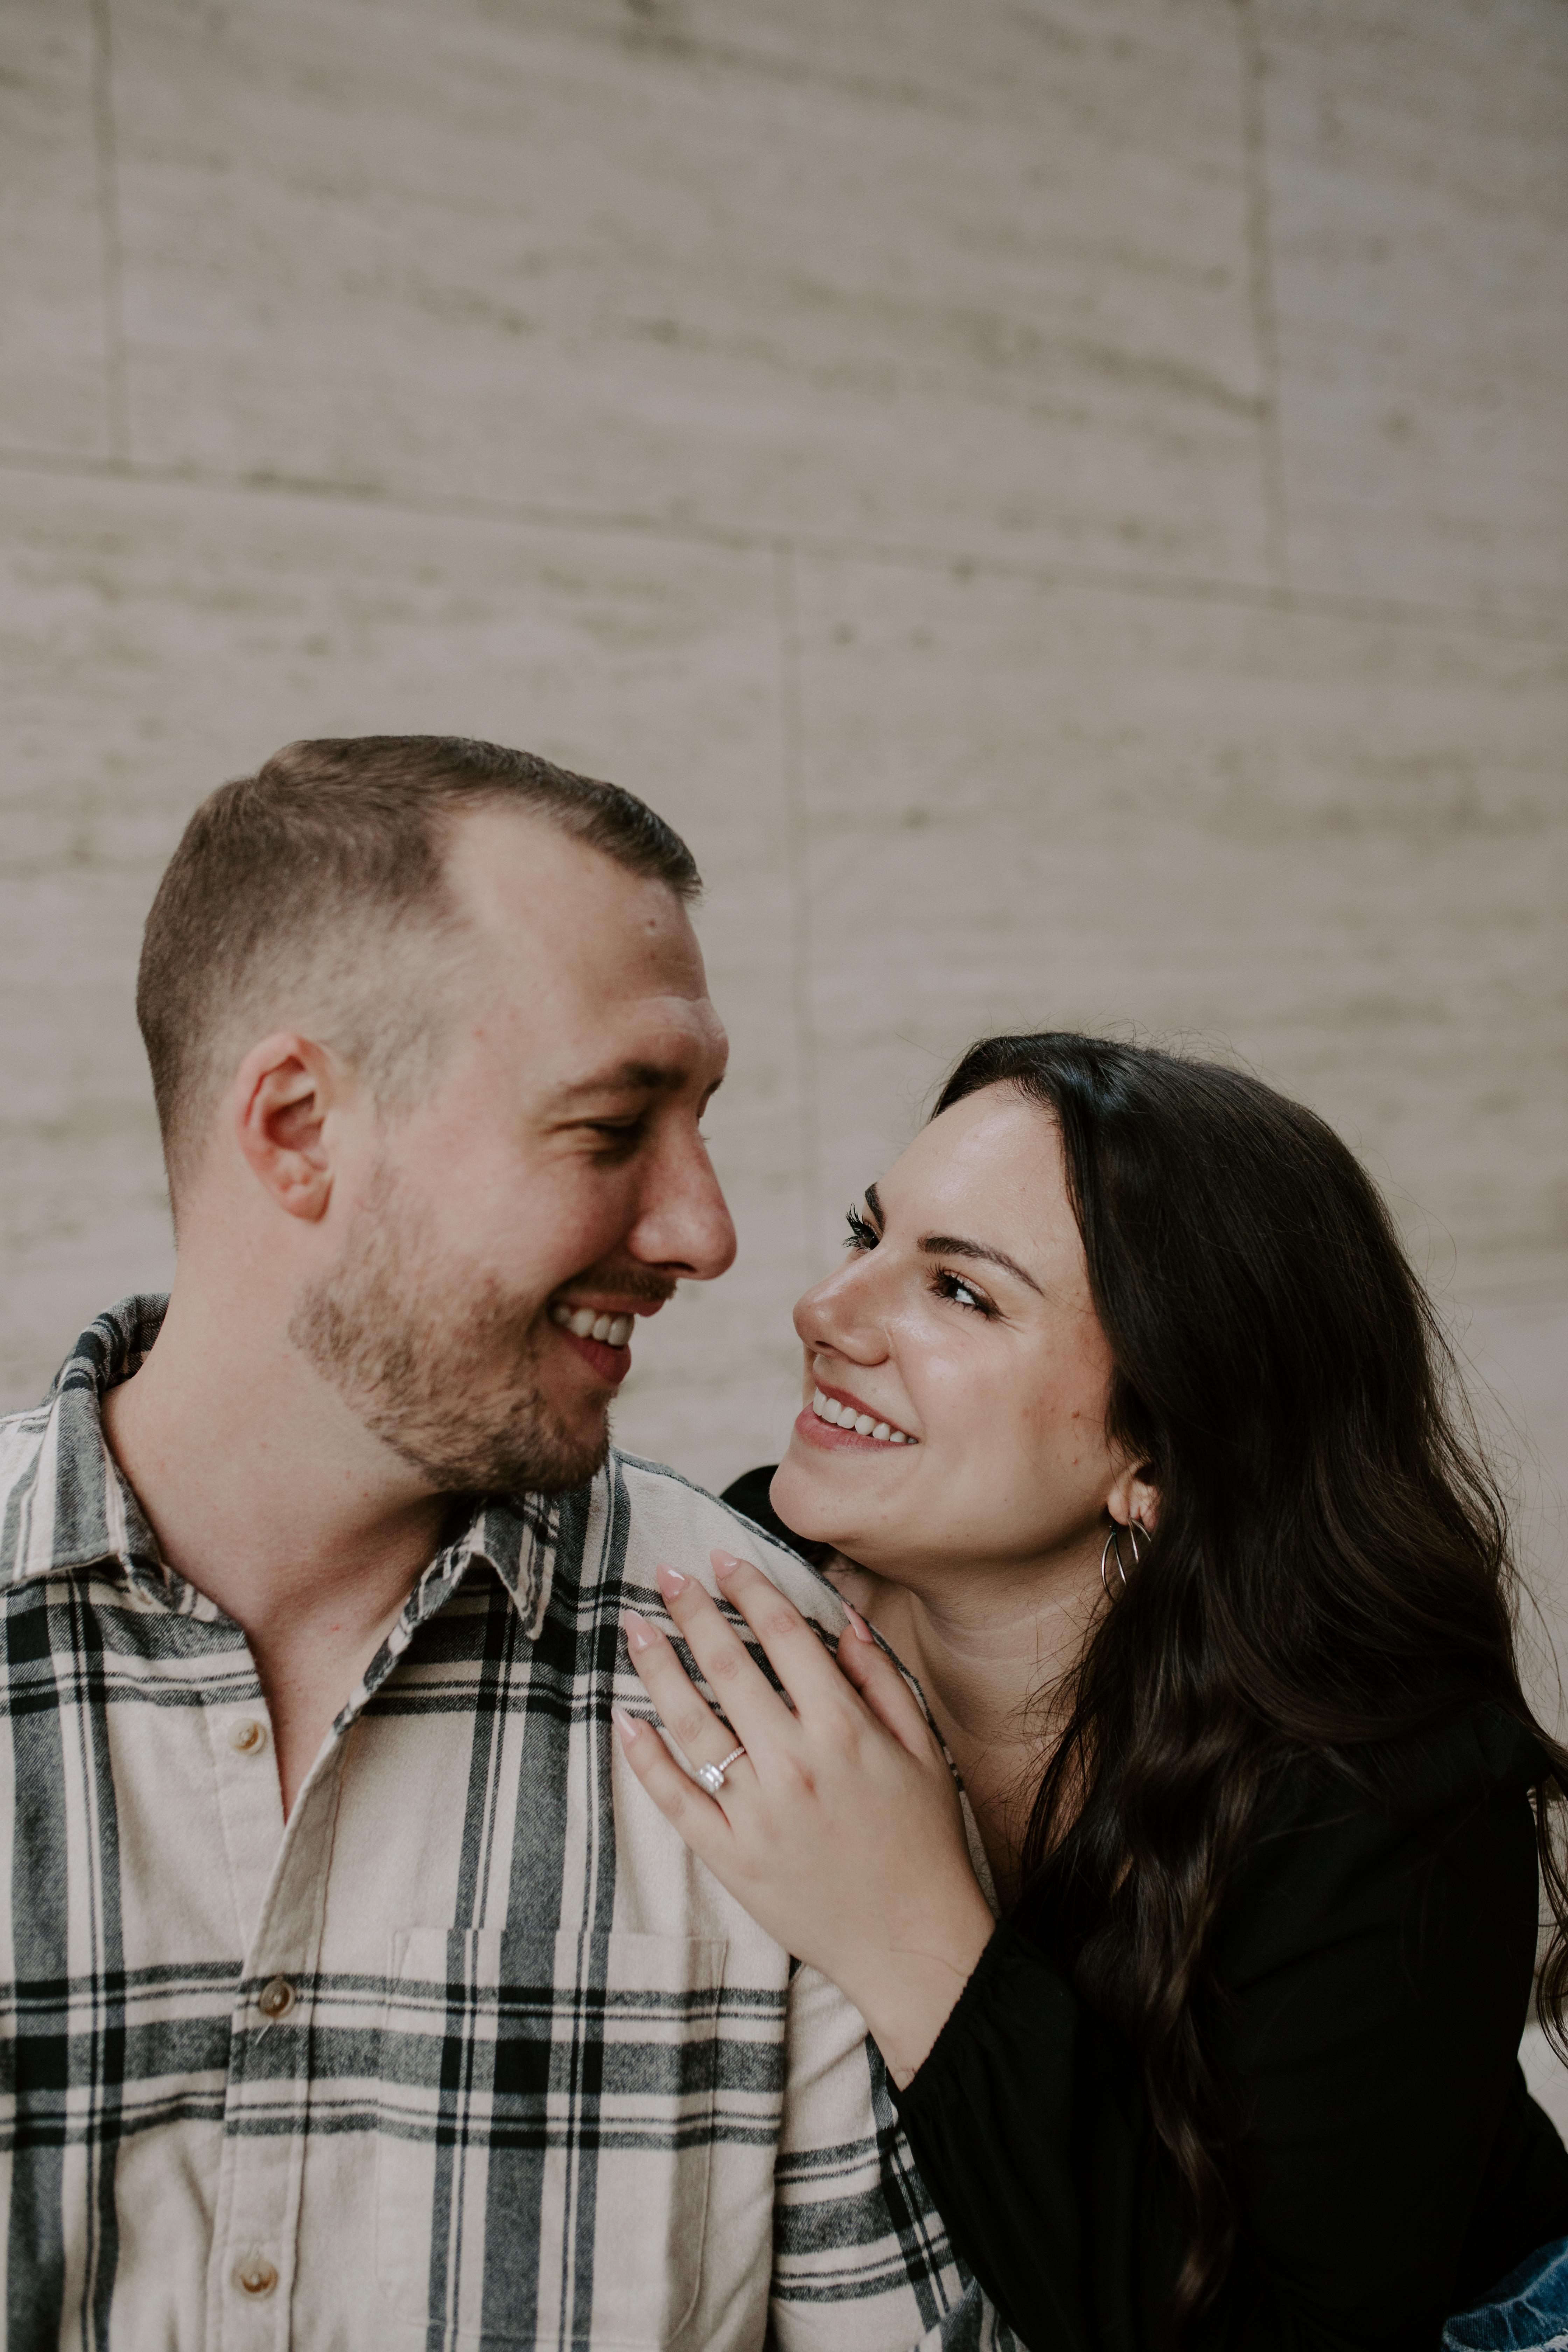 The Wedding Website of Alexis Symcheck and Scott Robison